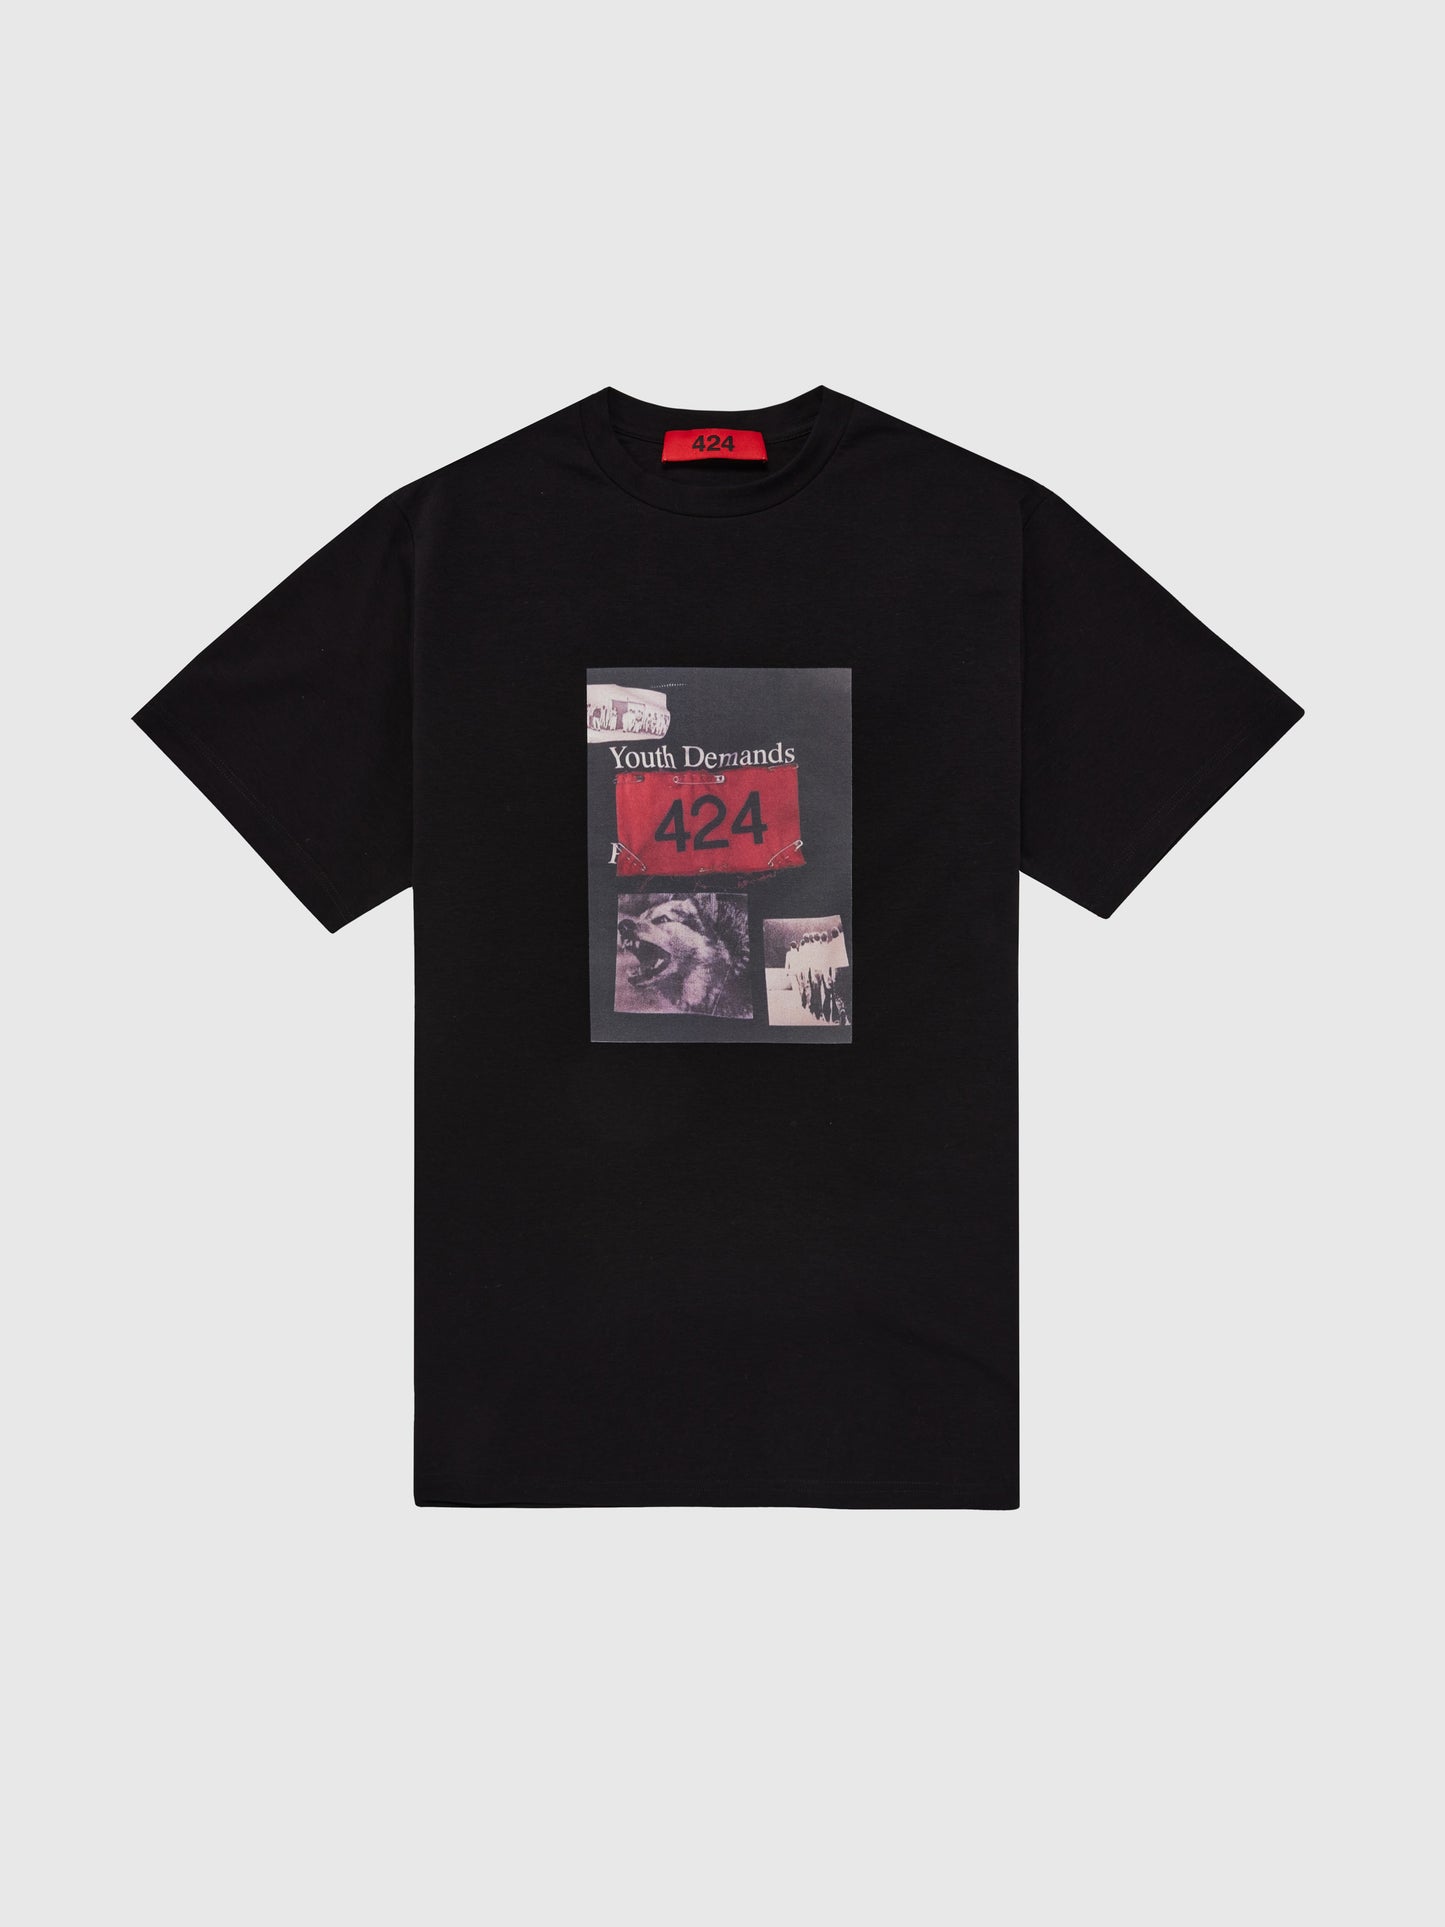 BLACK "YOUTH DEMANDS" GRAPHIC TEE